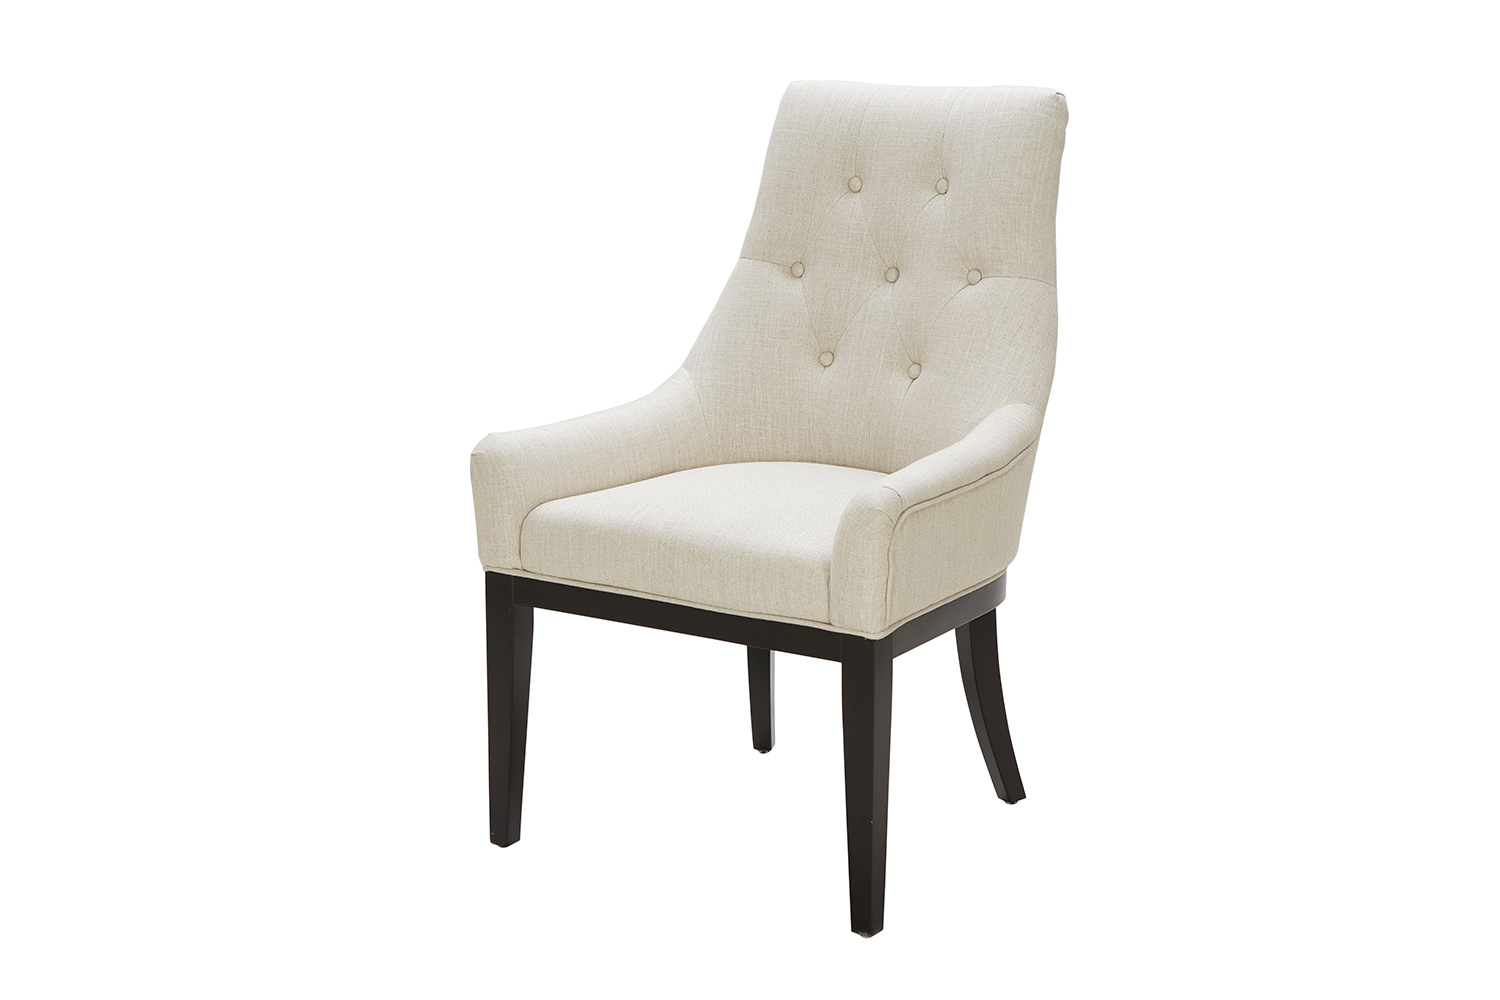 ELEMENTS Fine Home Furnishings Cameron Dining Chair - Wheat